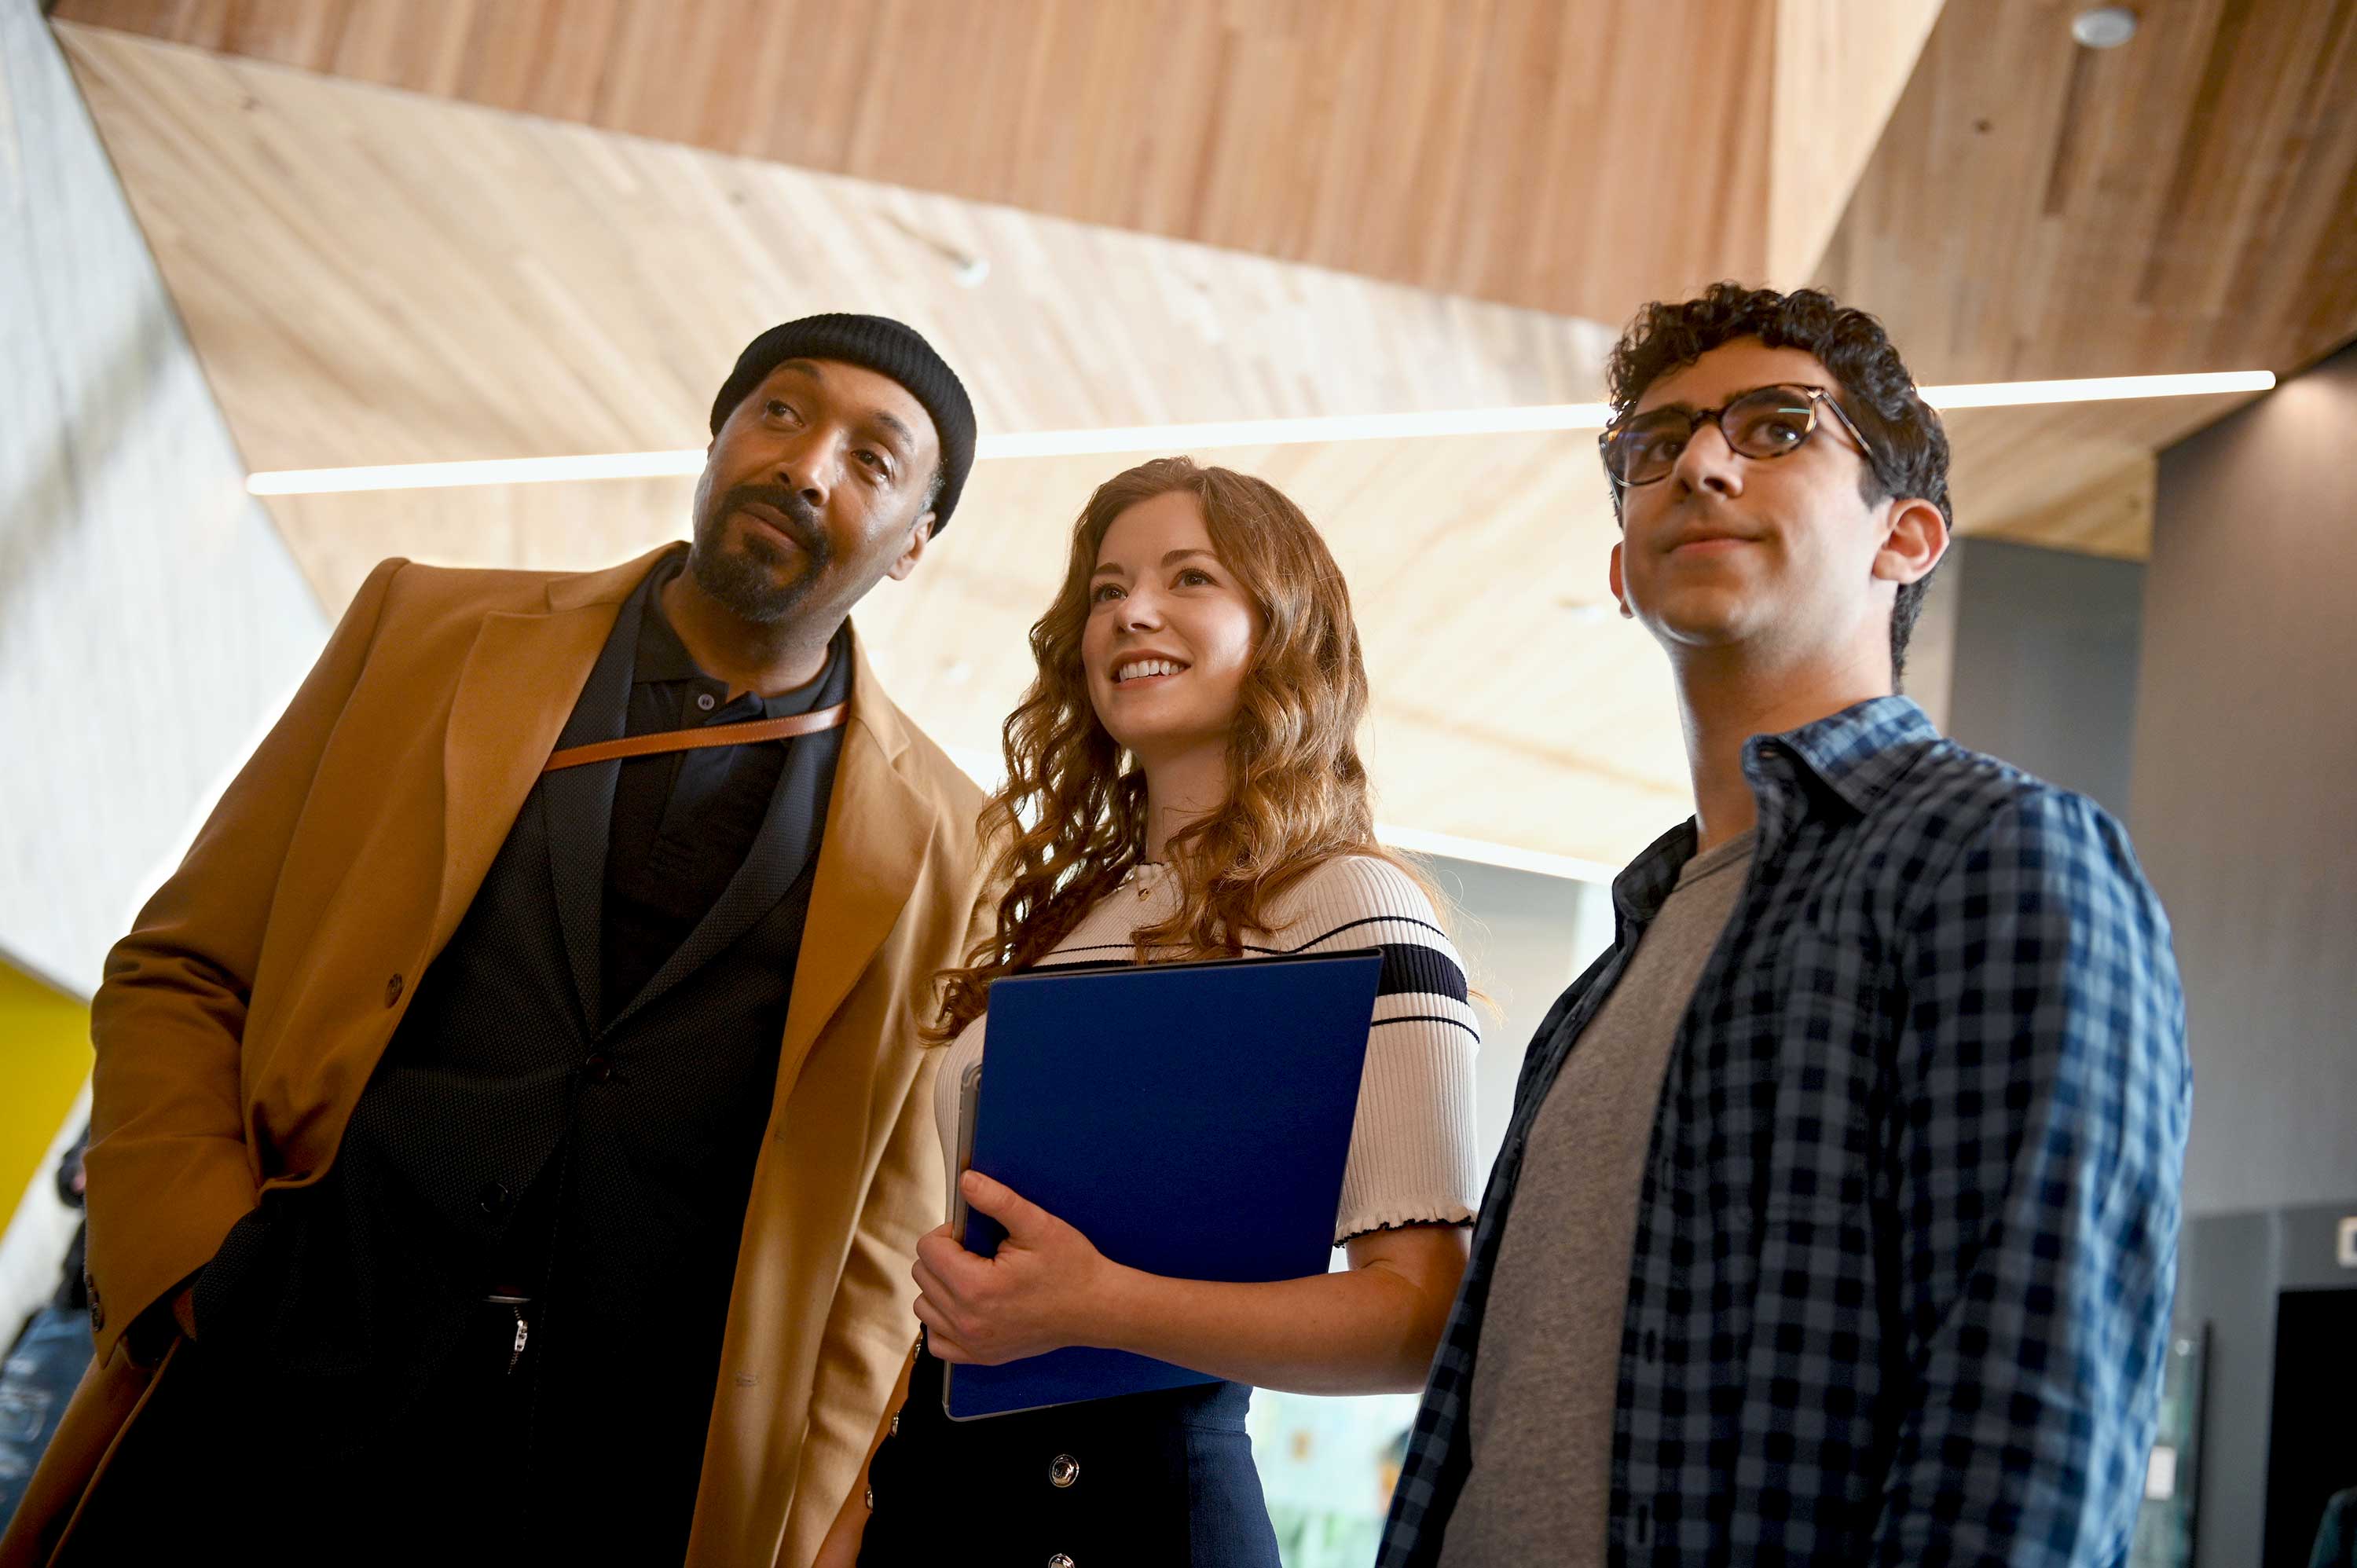 Alec Mercer (Jesse L. Martin), Phoebe (Molly Kunz), and Owen (Arash Demaxi) in a scene from The Irrational.